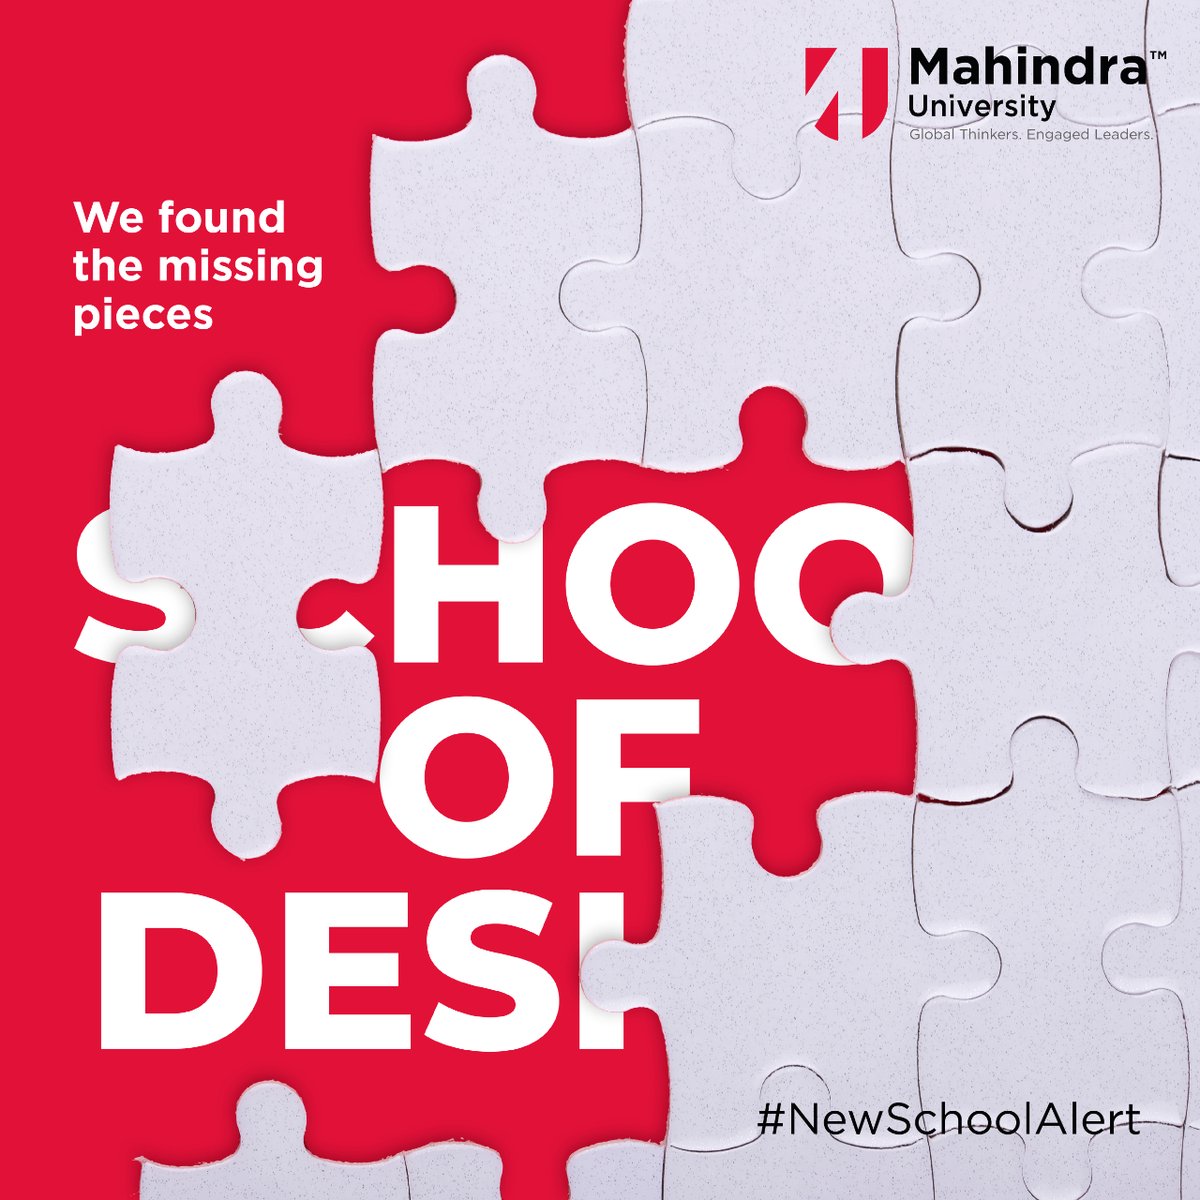 After months of searching for the missing pieces for our next school project, we've finally found them! We can hardly contain our excitement as we prepare to unveil something truly incredible. 

Stay tuned for a BIG announcement tomorrow!

#MahindraUniversity #BigAnnouncement